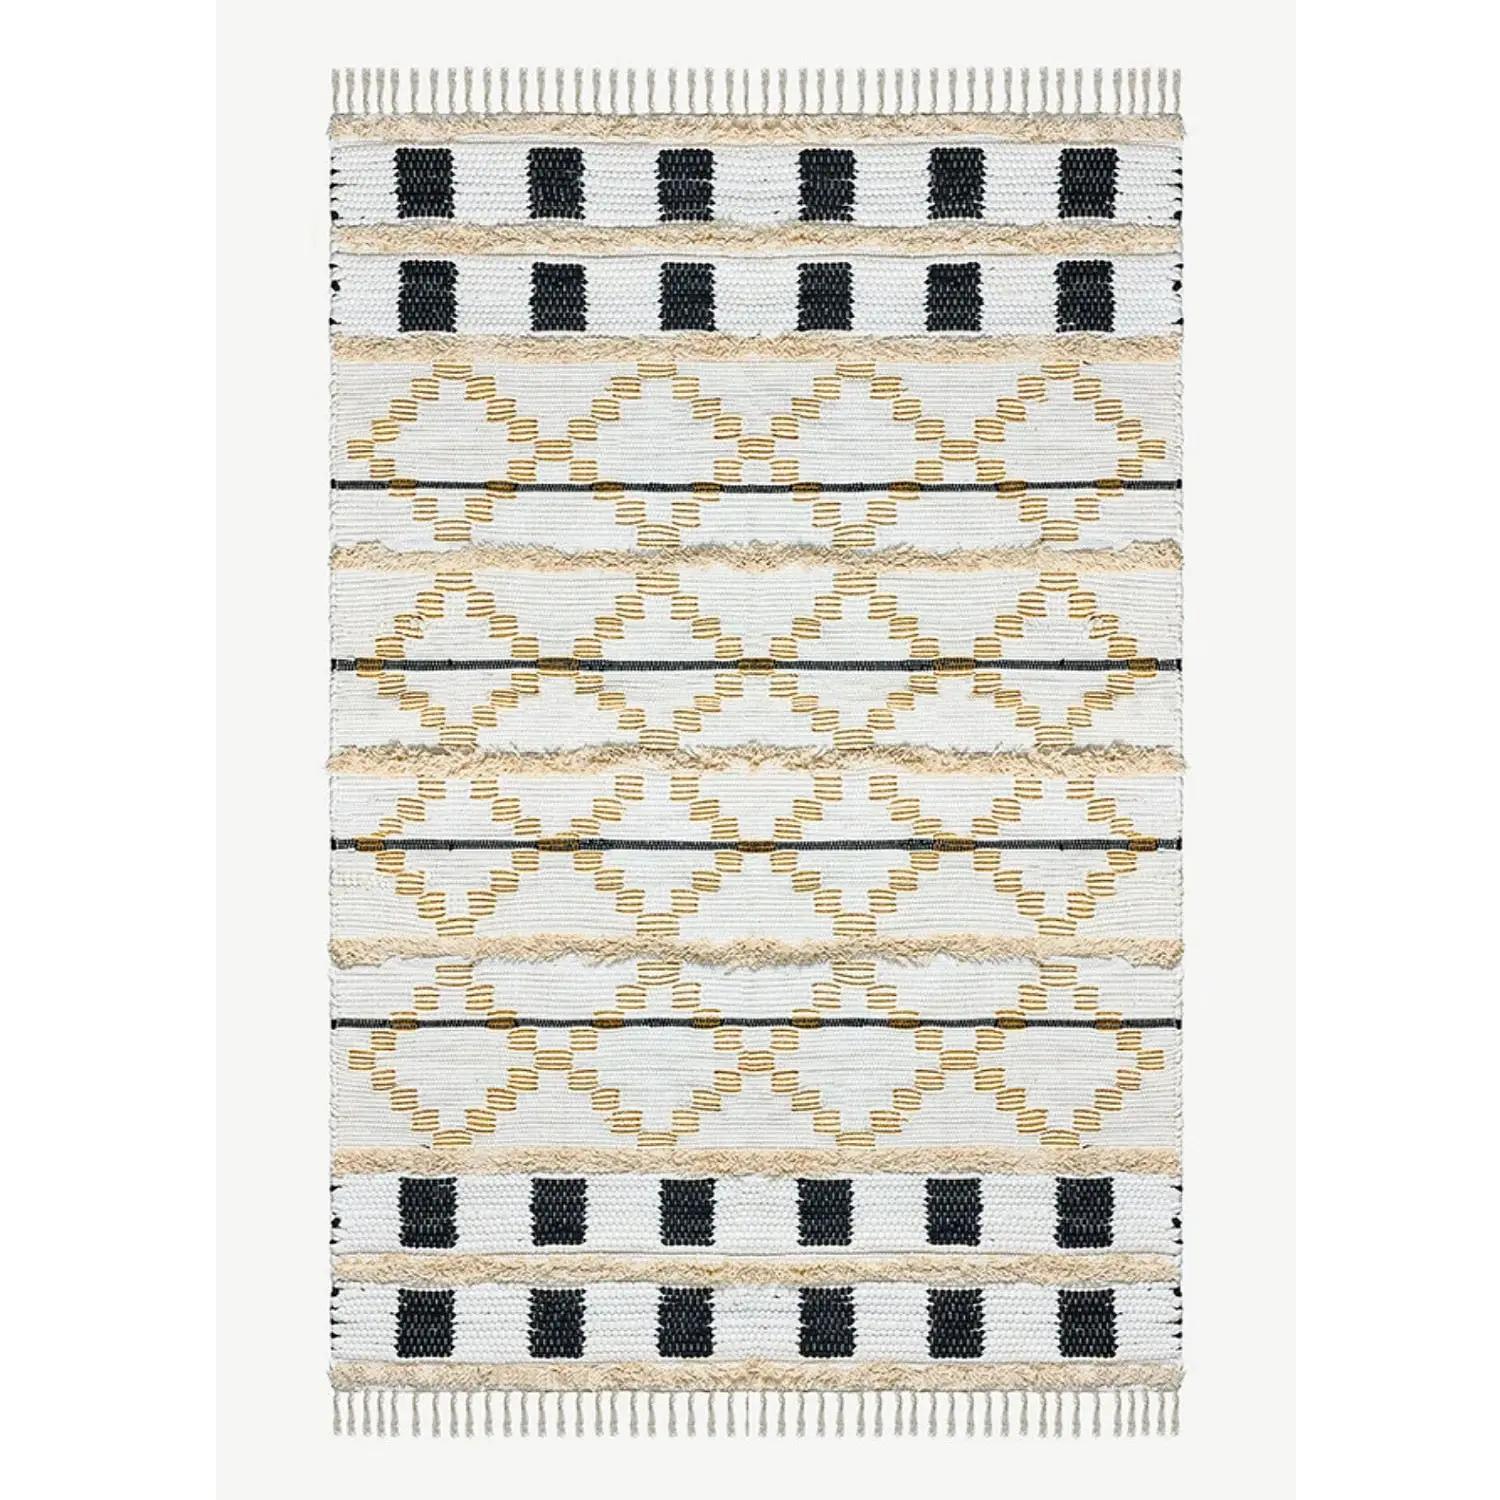 Popular Designed Cotton Floor Rug Carpet Top Selling Eco Friendly Home Decorative Entrance Way Door Mat From India